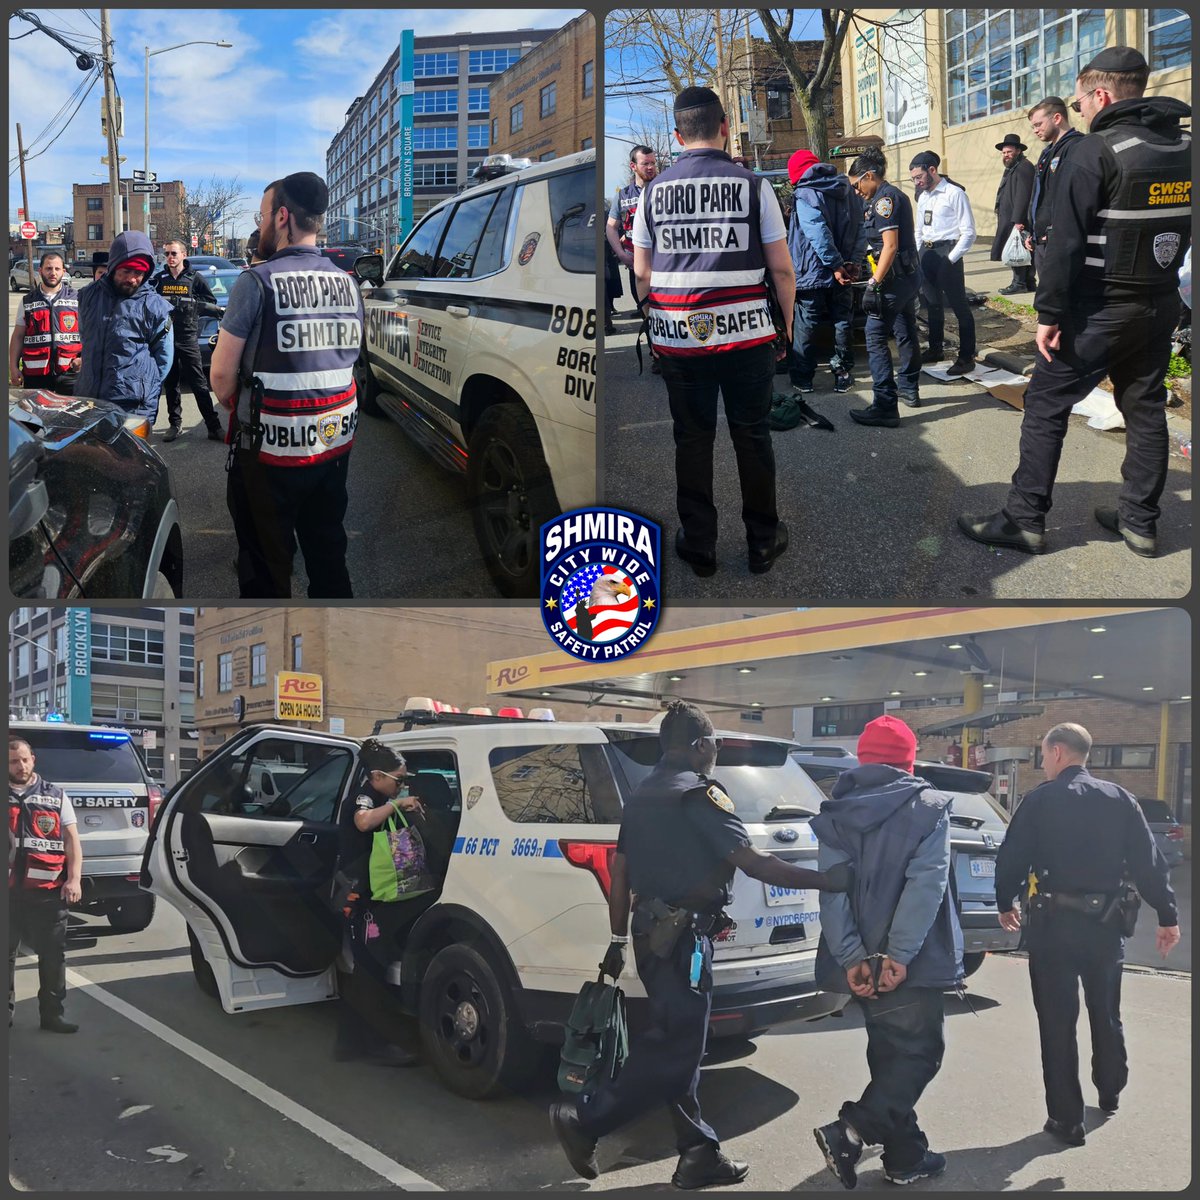 Thanks to one of our sharp eyed volunteers, This serial bike thief wanted for stealing dozens of expensive bikes & electric scooters in the #BoroPark and #Flatbush neighborhoods was apprehended and arrested. Great #TeamWork with @NYPD66Pct #WorkingTogether! #FightingCrime